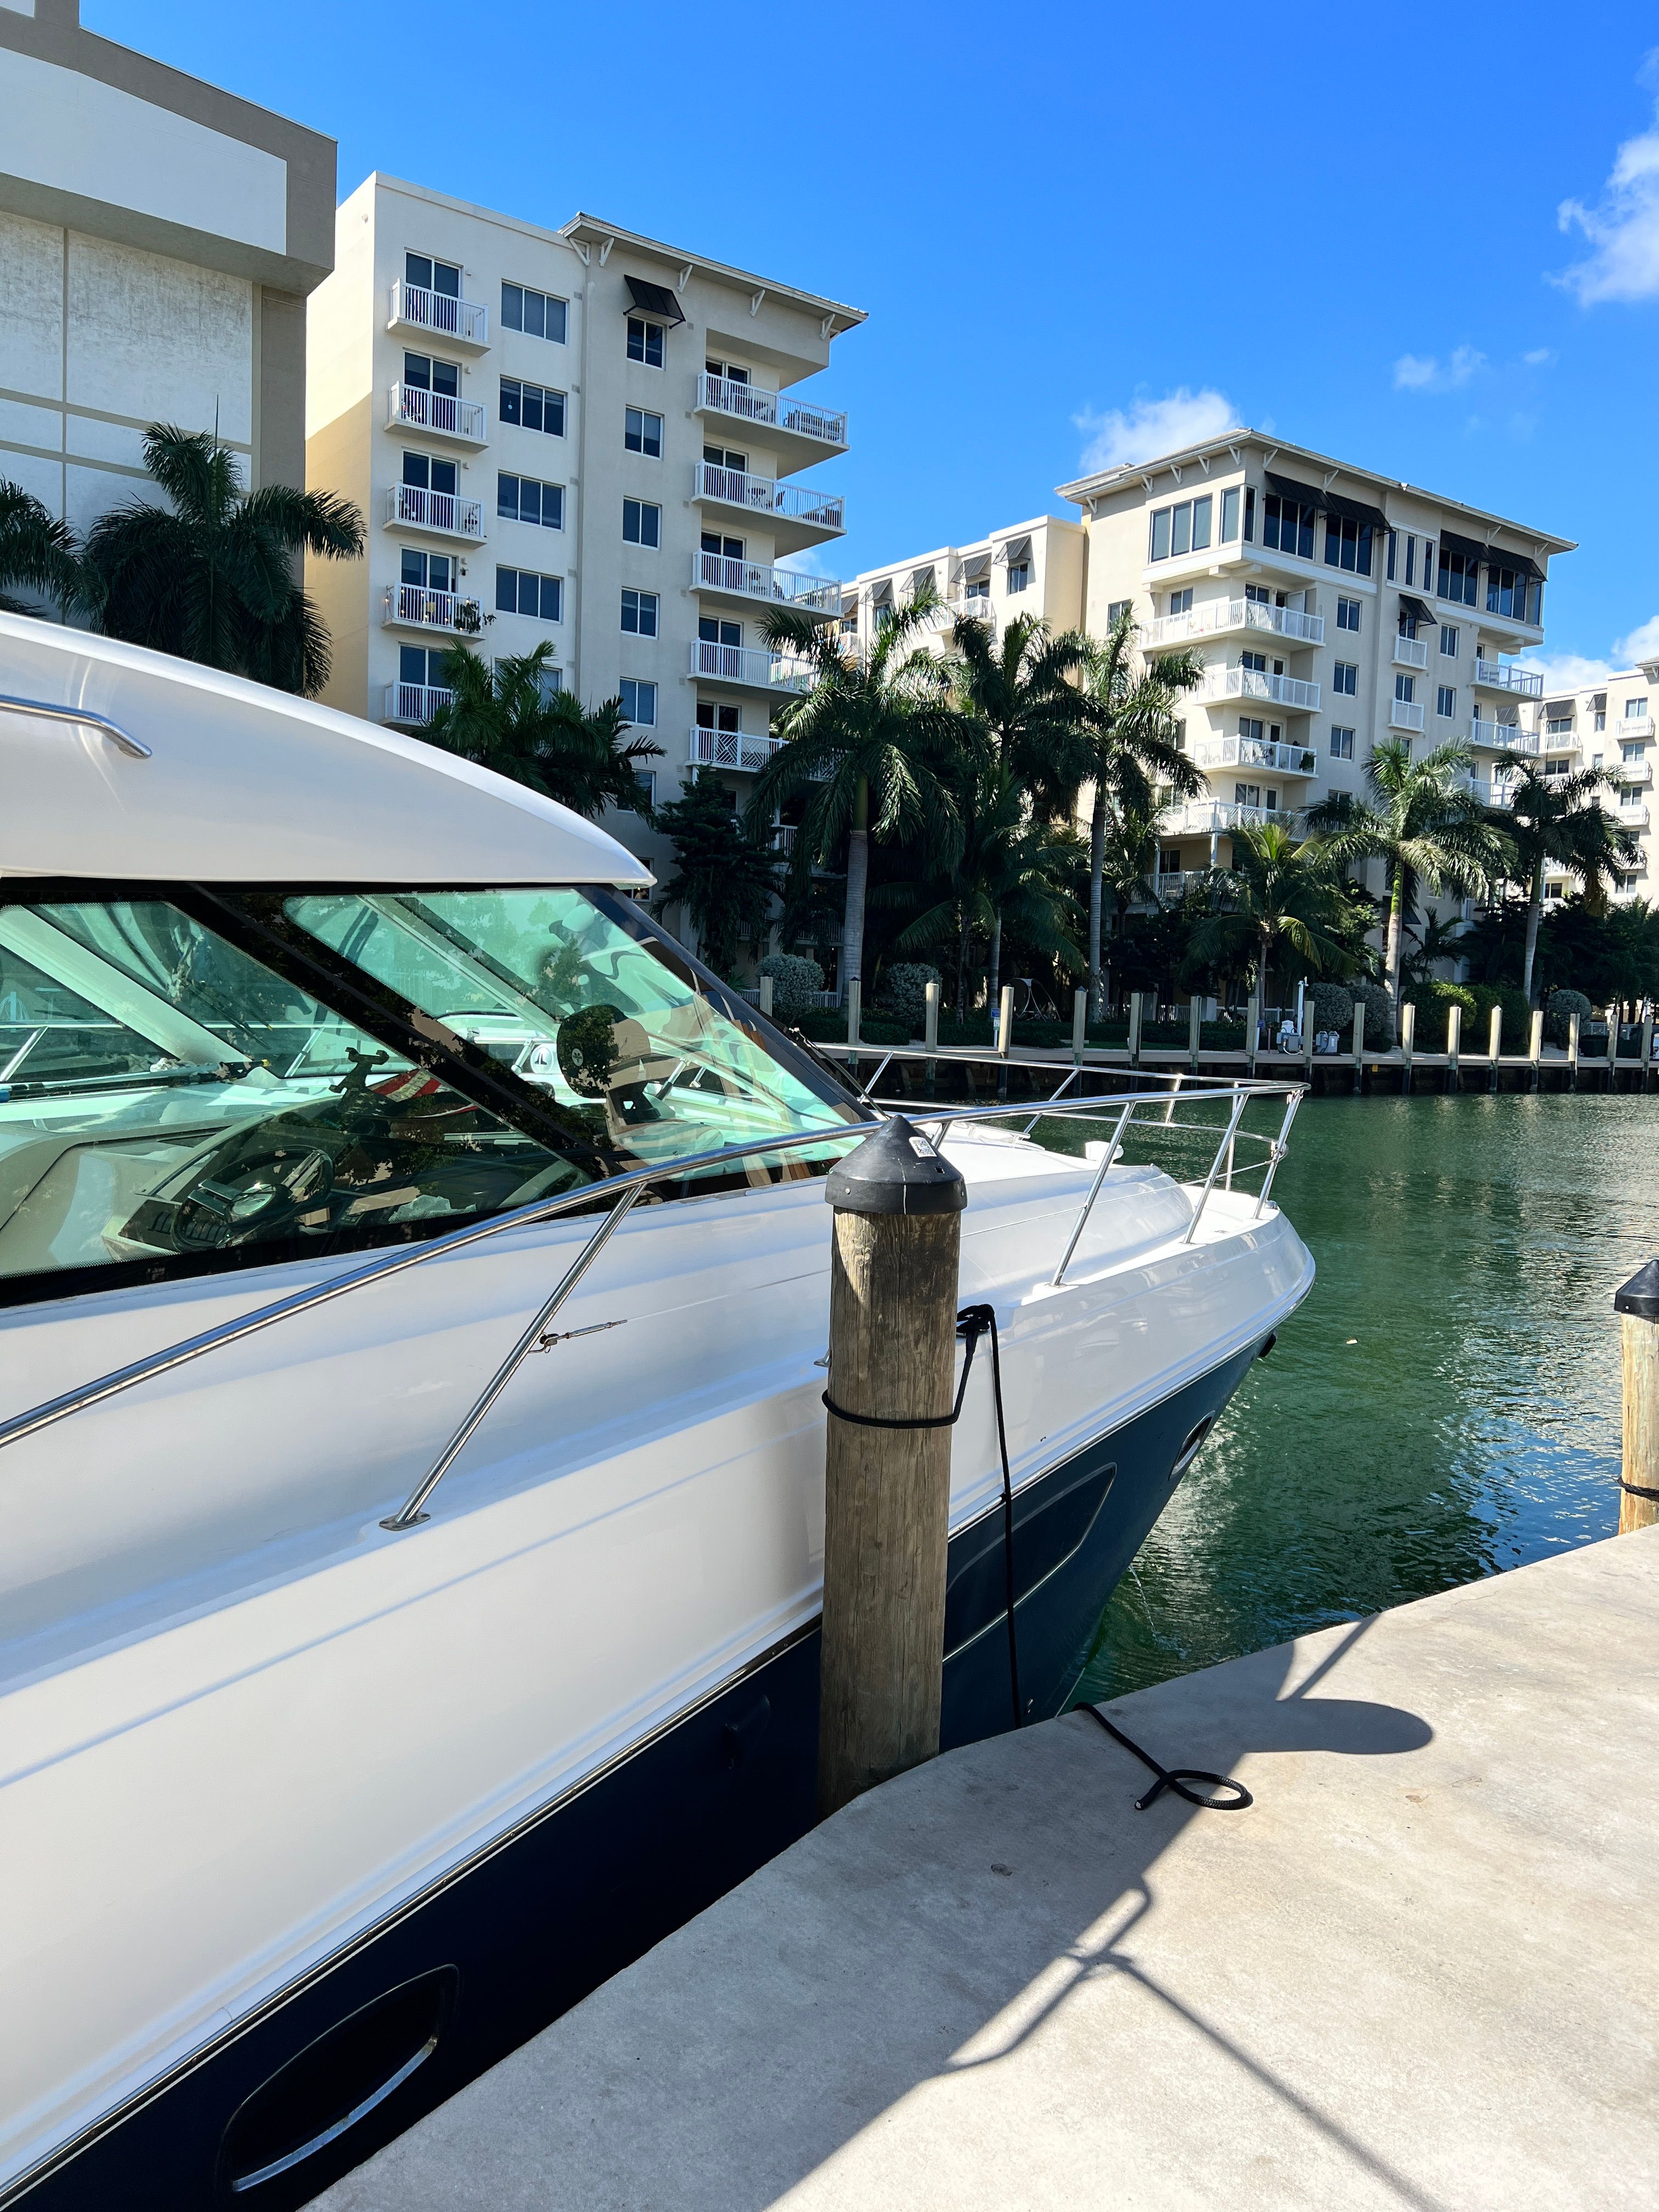 Boat Rental For the Canals of Fort Lauderdale By Boat Setter